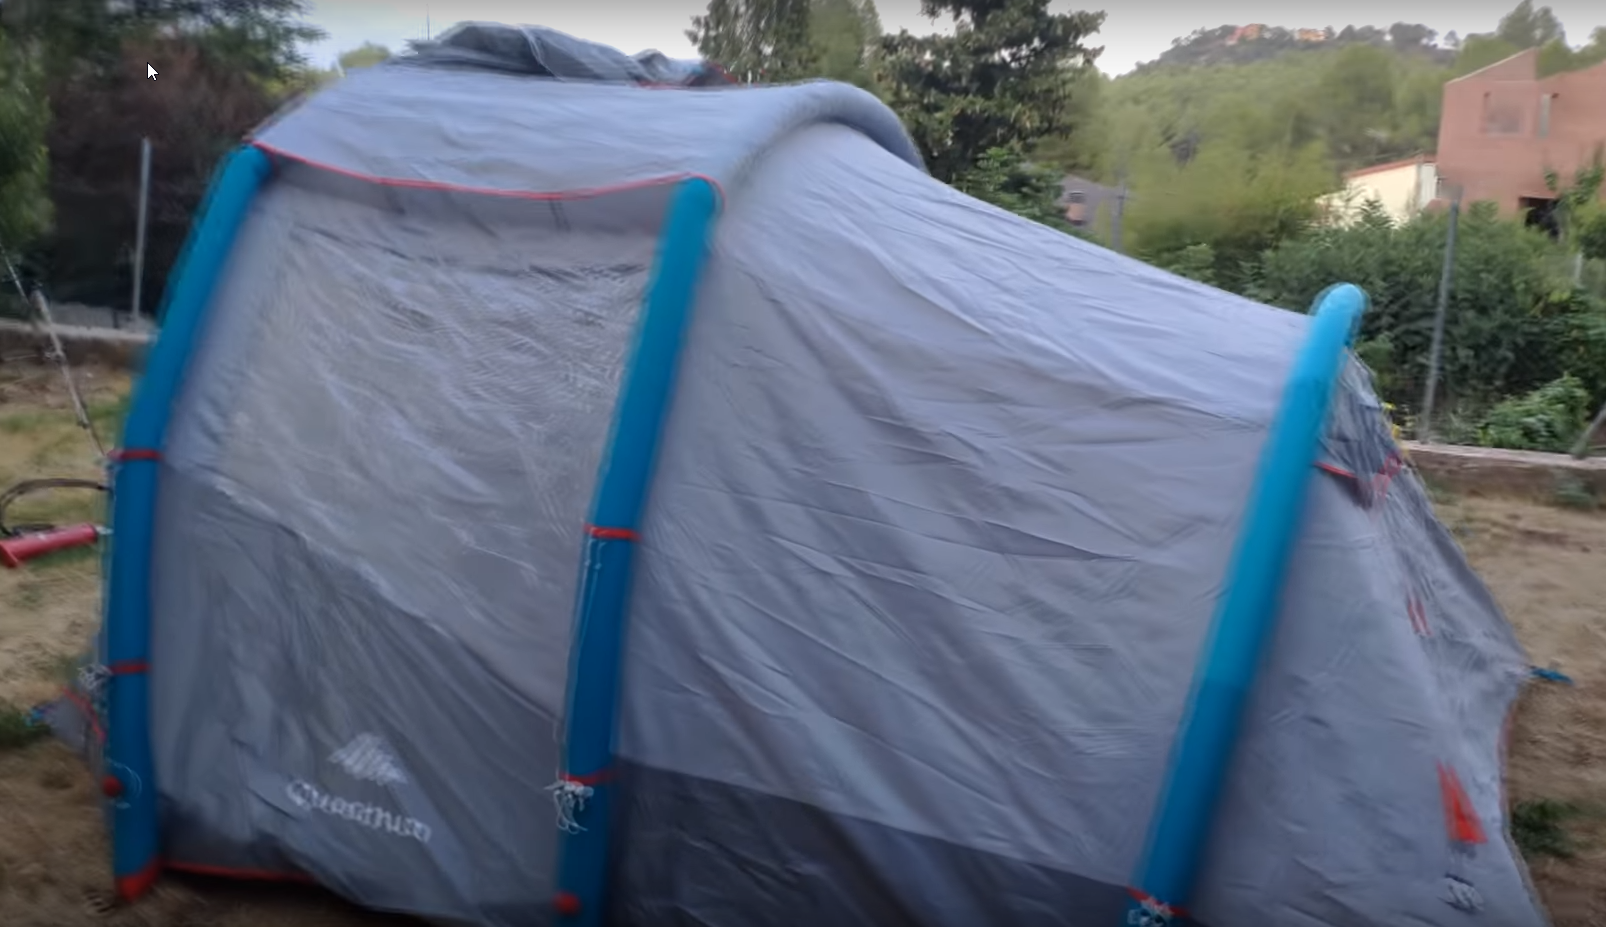 2018-08-30 01_37_52-Setting up camping tent Air seconds 4.1 family XL Quechua Decathlon - YouTube.png